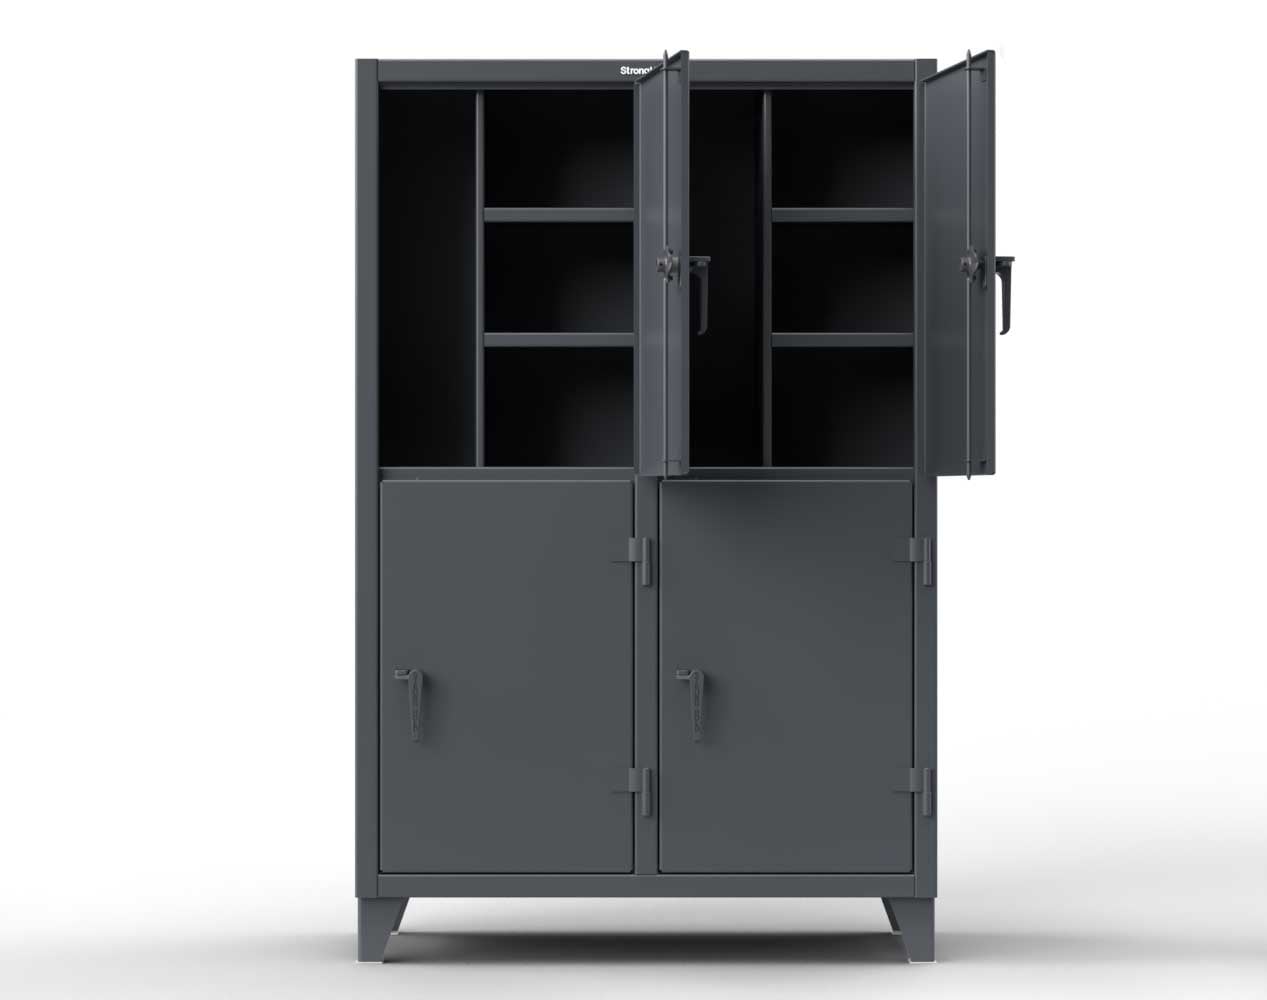 Extreme Duty 12 GA Double-Tier Locker with 2 Compartments, 4 Shelves, Coat Hooks - 26 in. W x 24in. D x 78 in. H